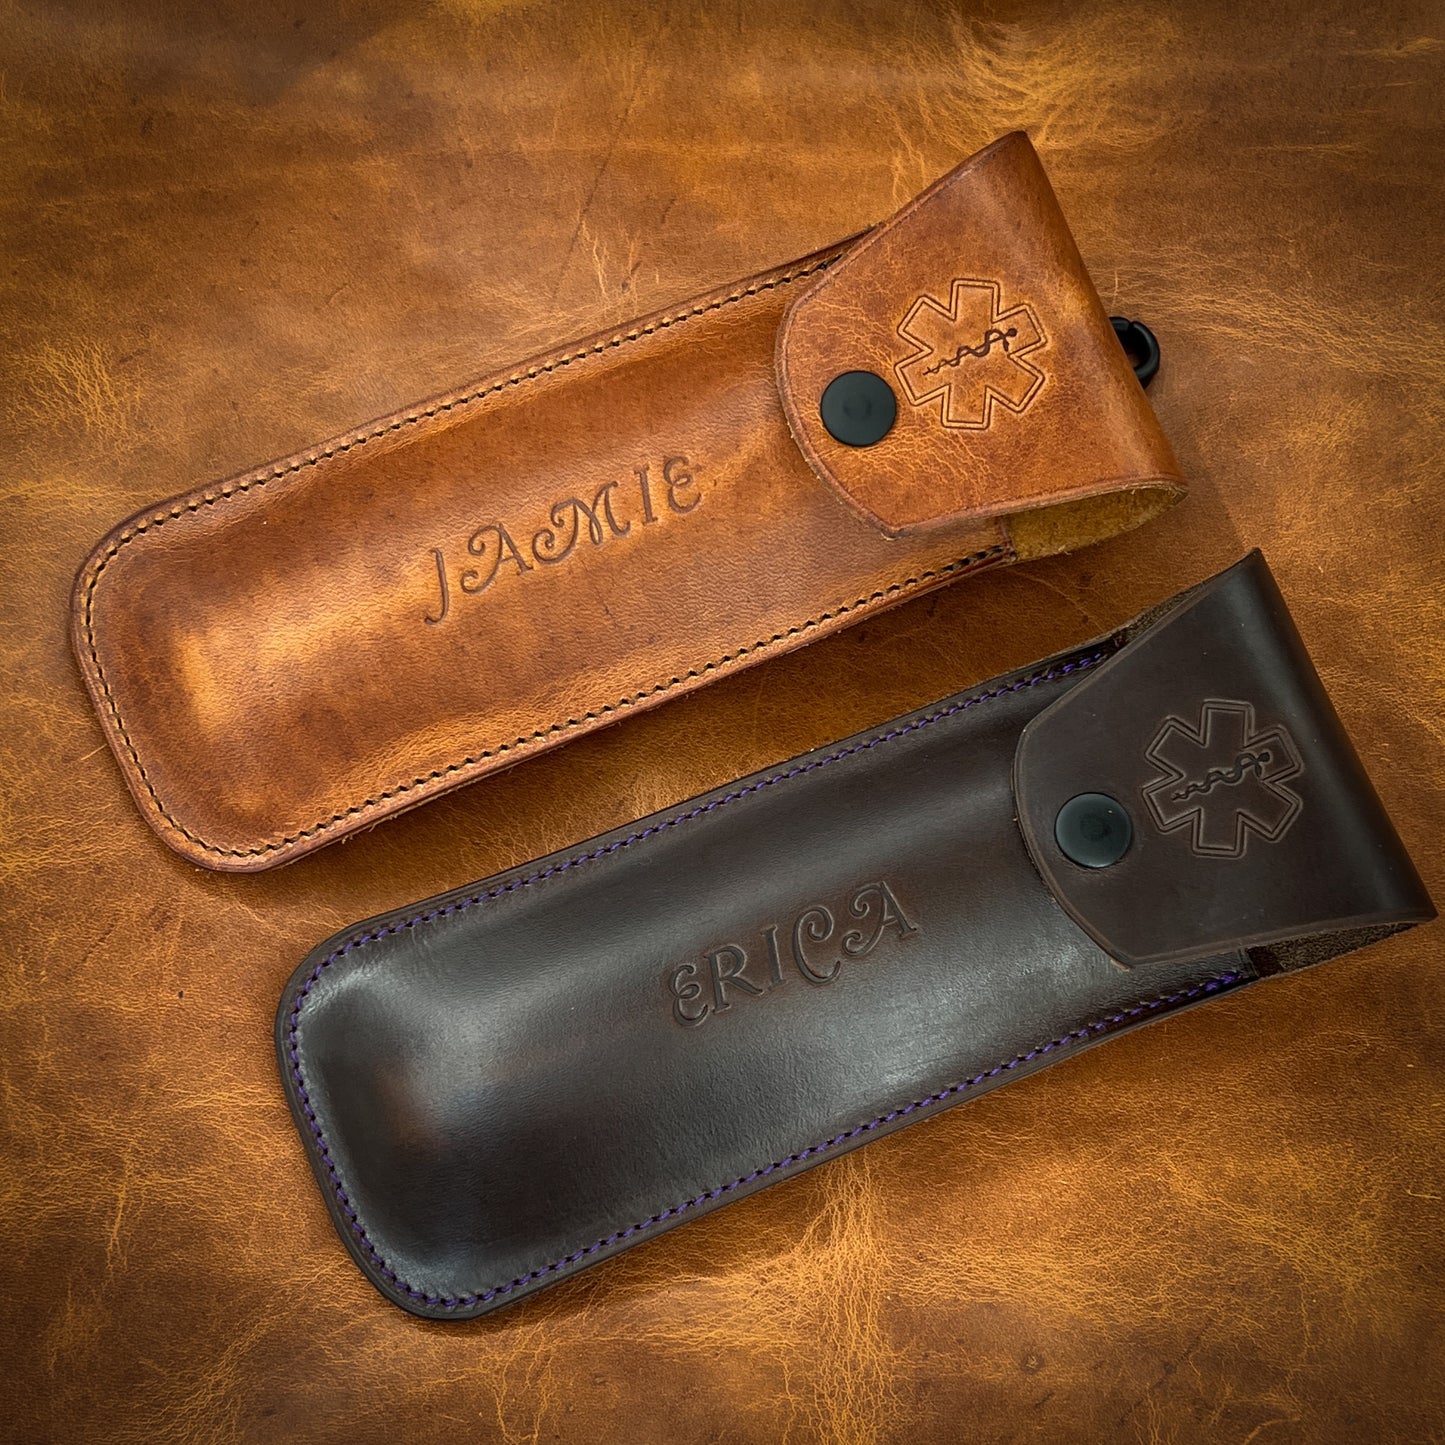 EpiPen Carrying Cases in Horween Leather | Handmade in Houston, TX by Custom Leather and Pen